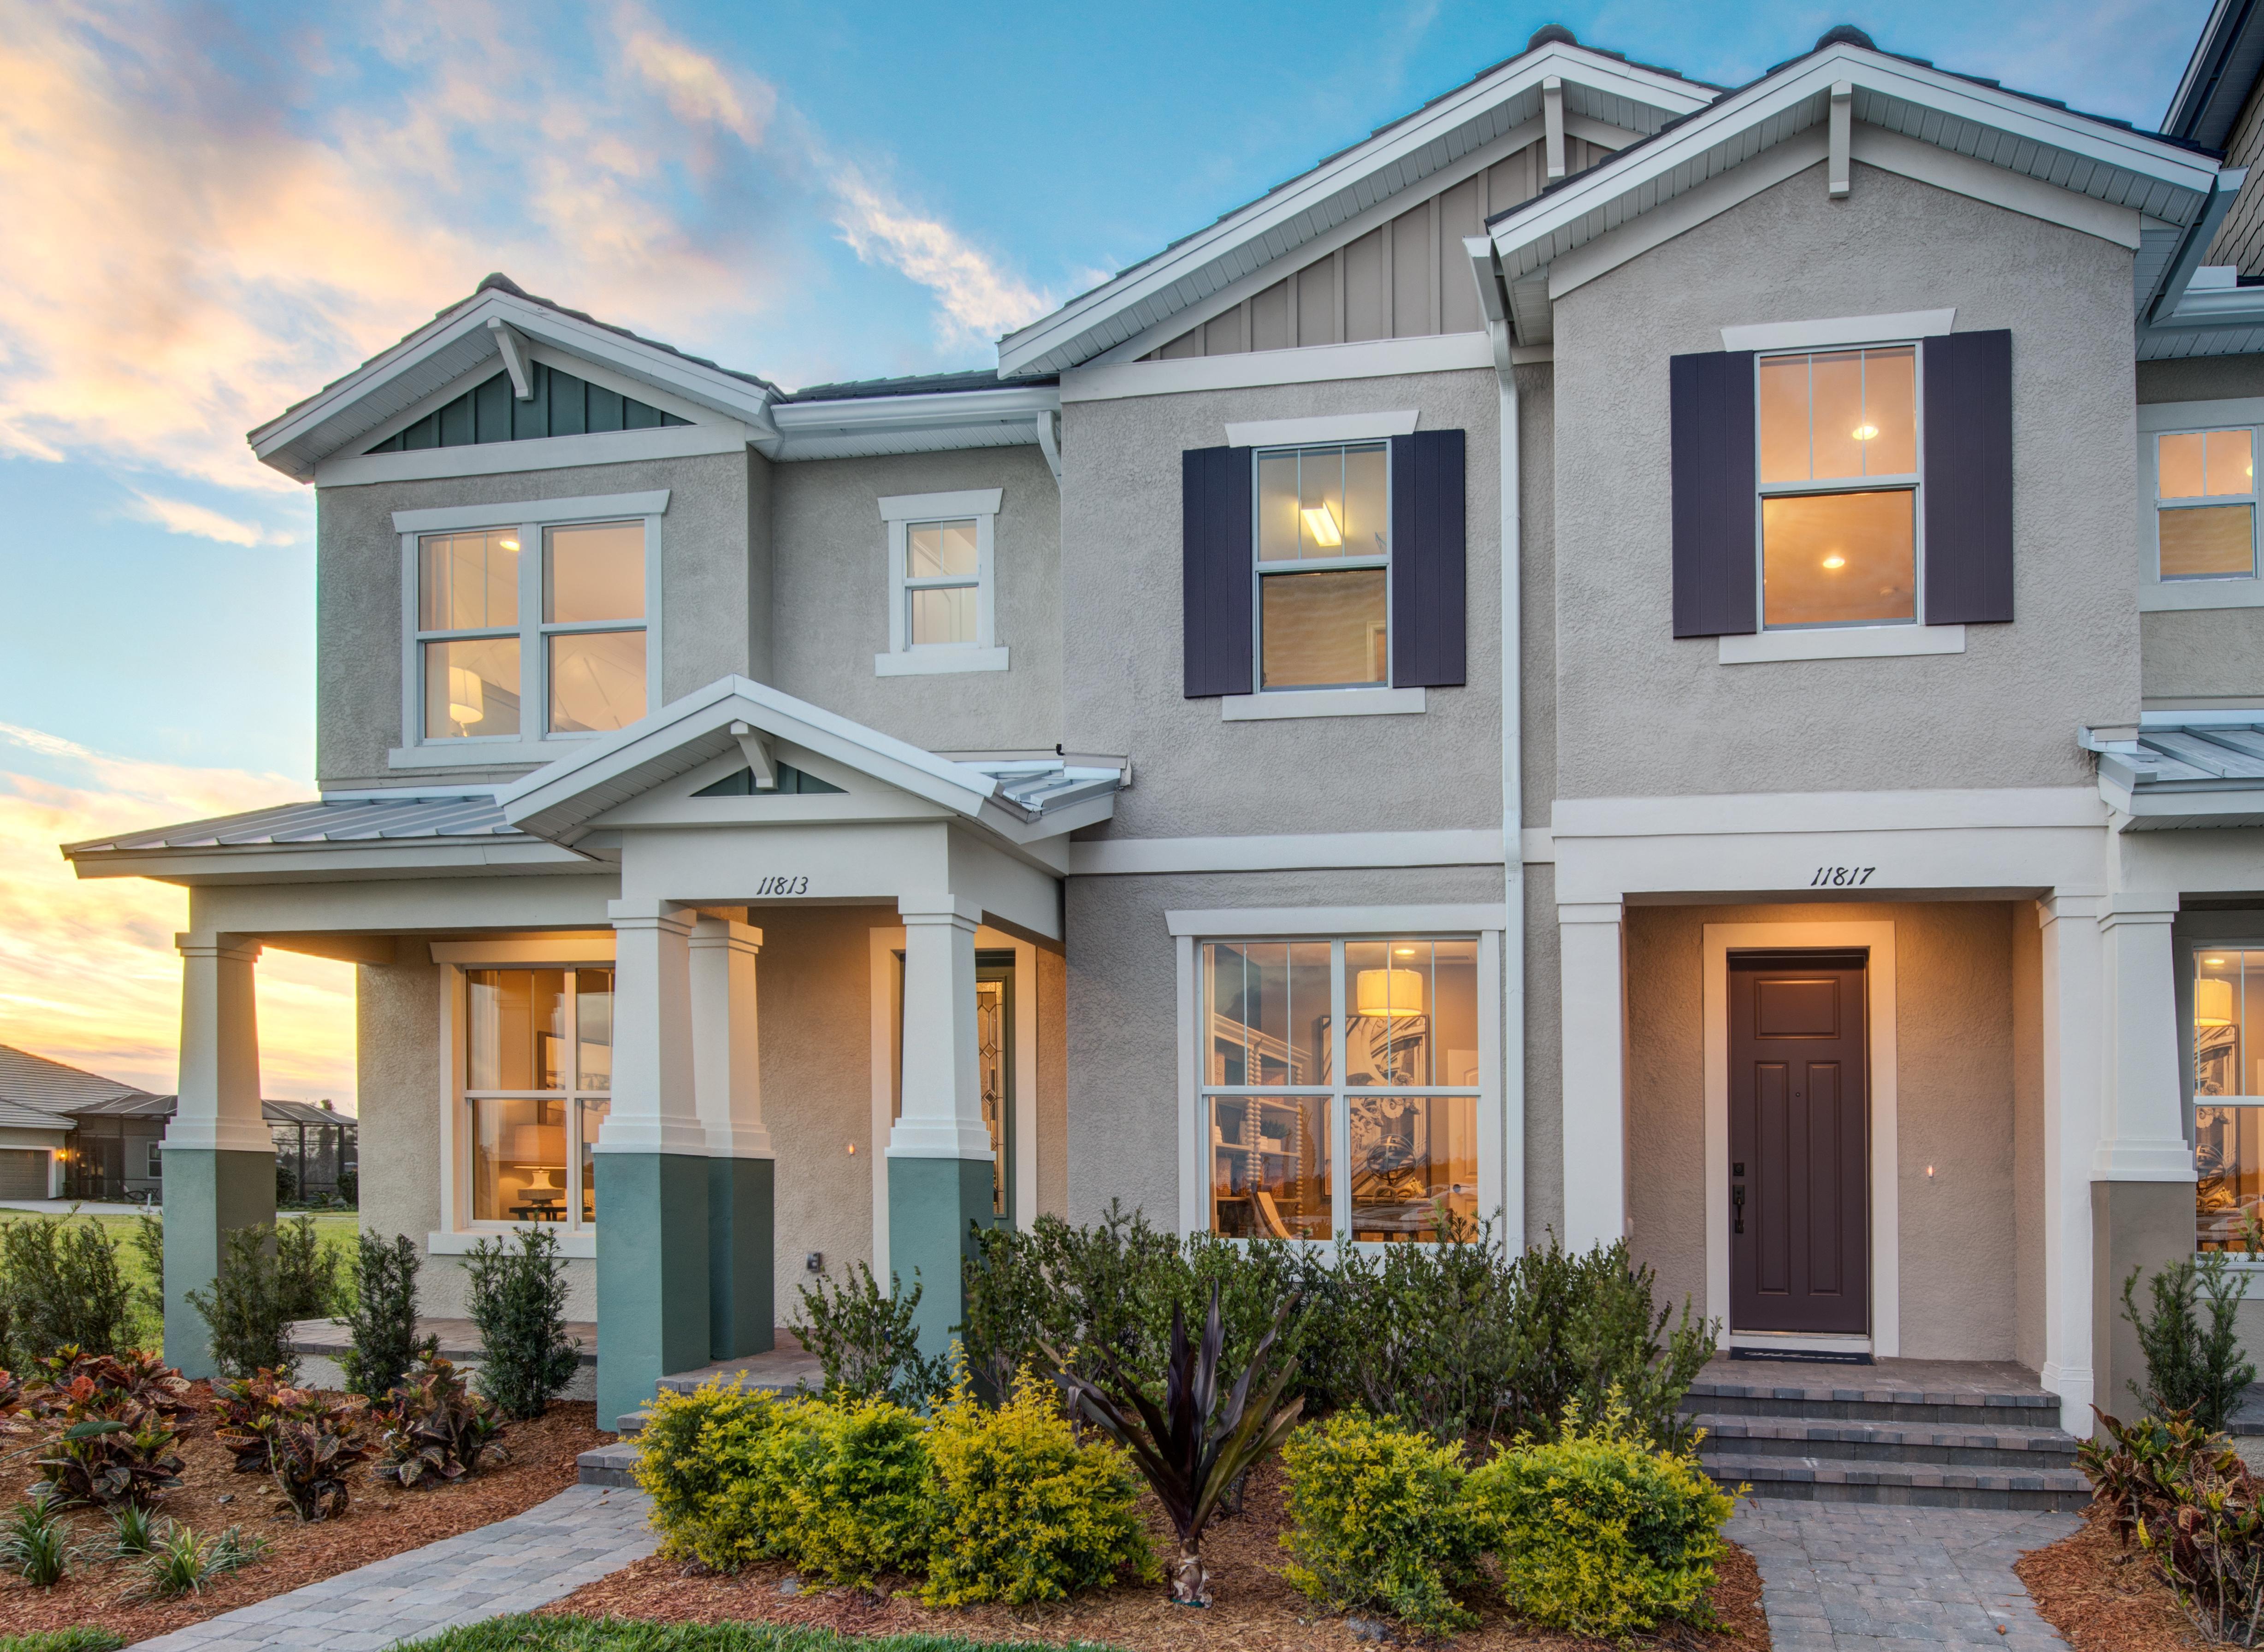 Mallory Park by Pulte/Divosta, at Lakewood Ranch, Florida